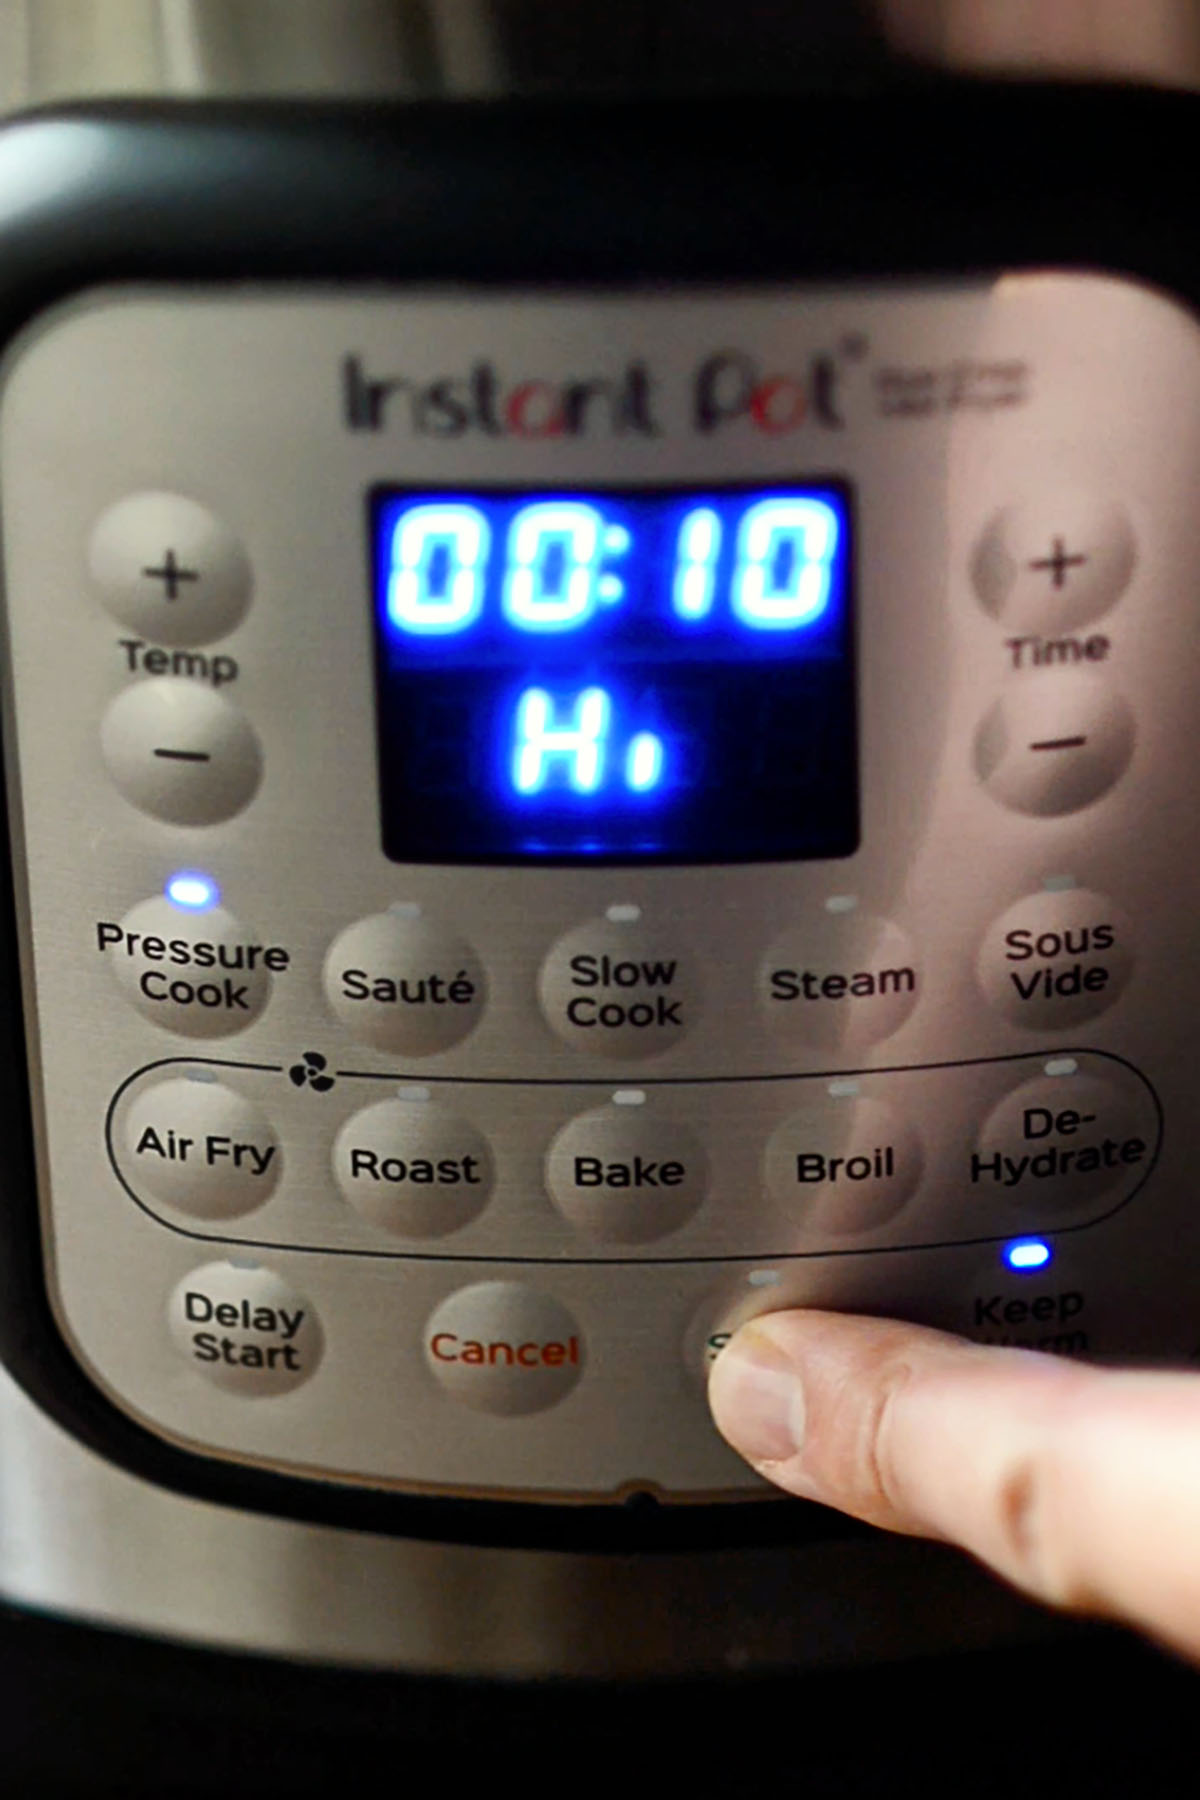 Instant Pot set to Pressure cook on high for 15 minutes.